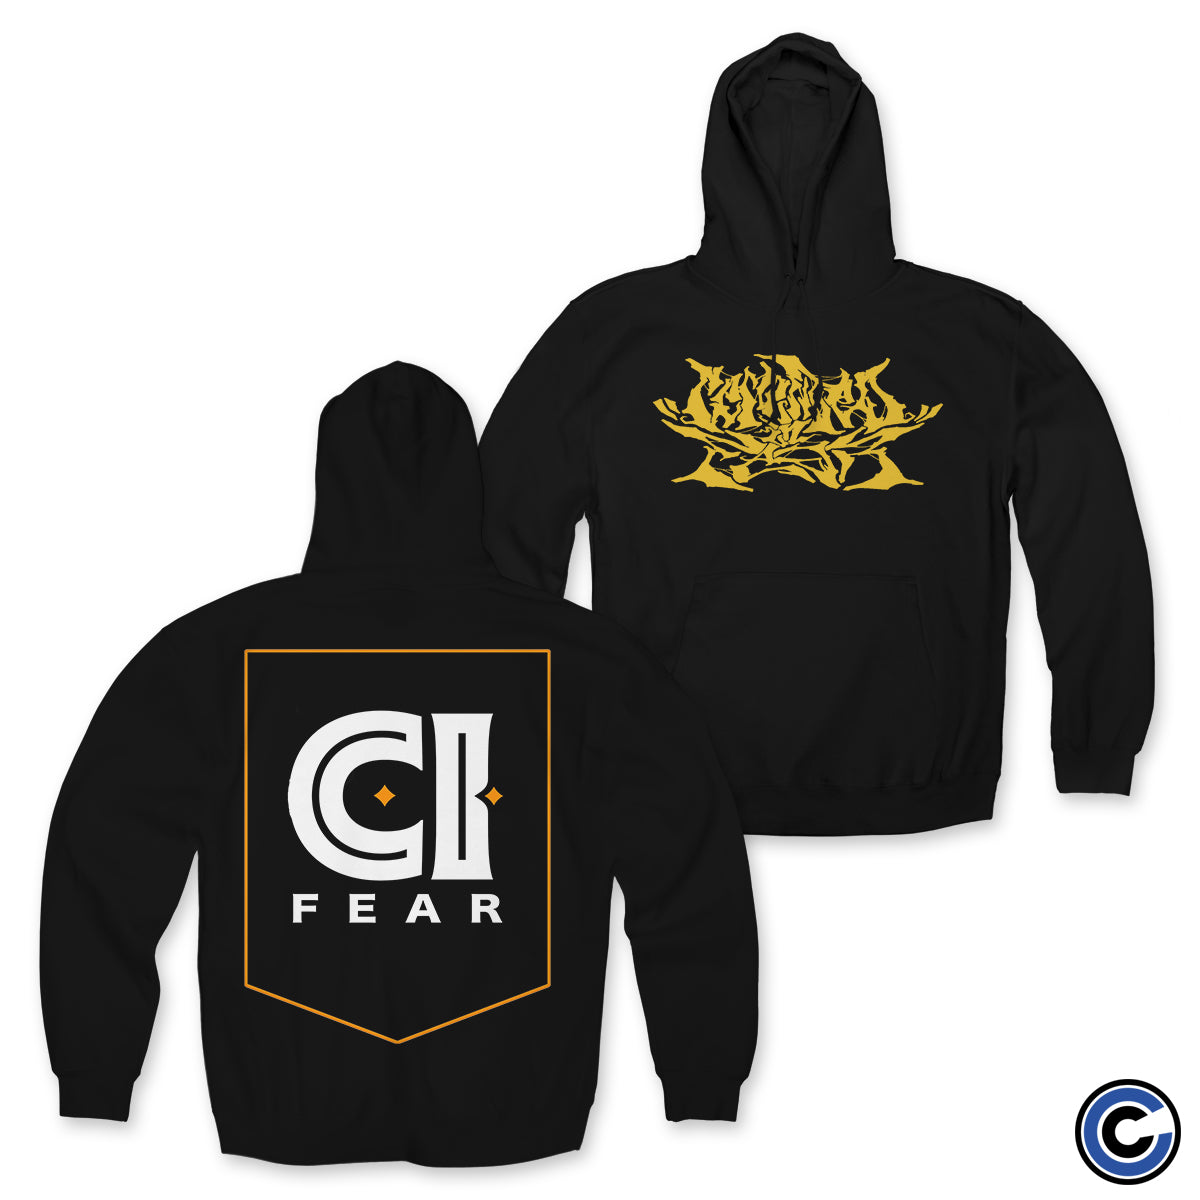 Cemented in Fear "Cemented" Hoodie